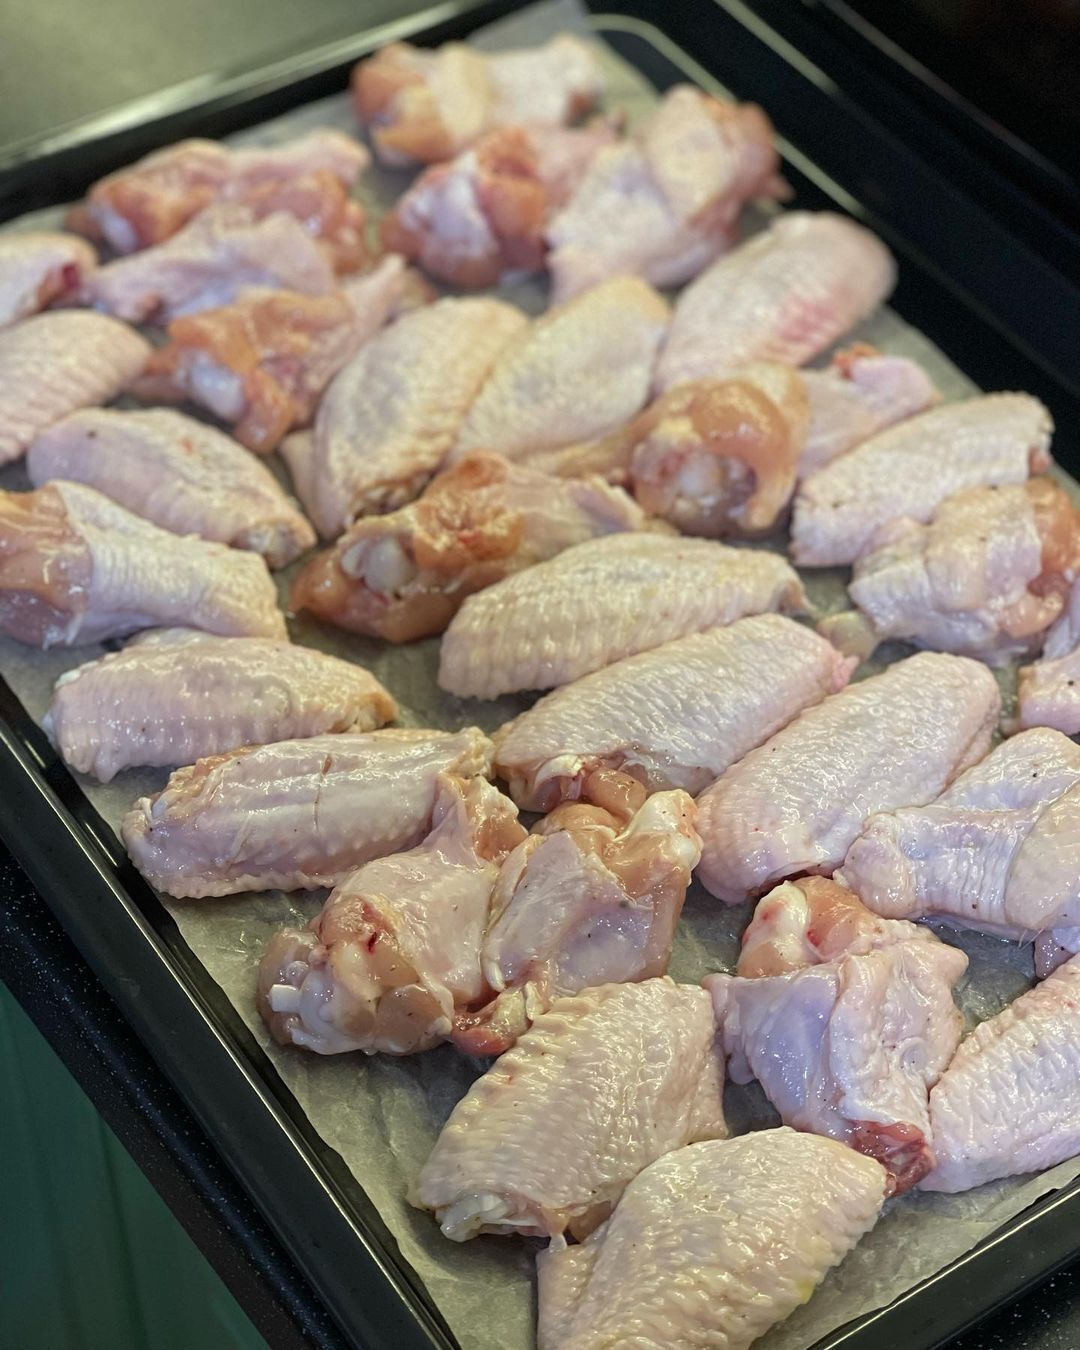 How long and how to properly store fresh chicken meat